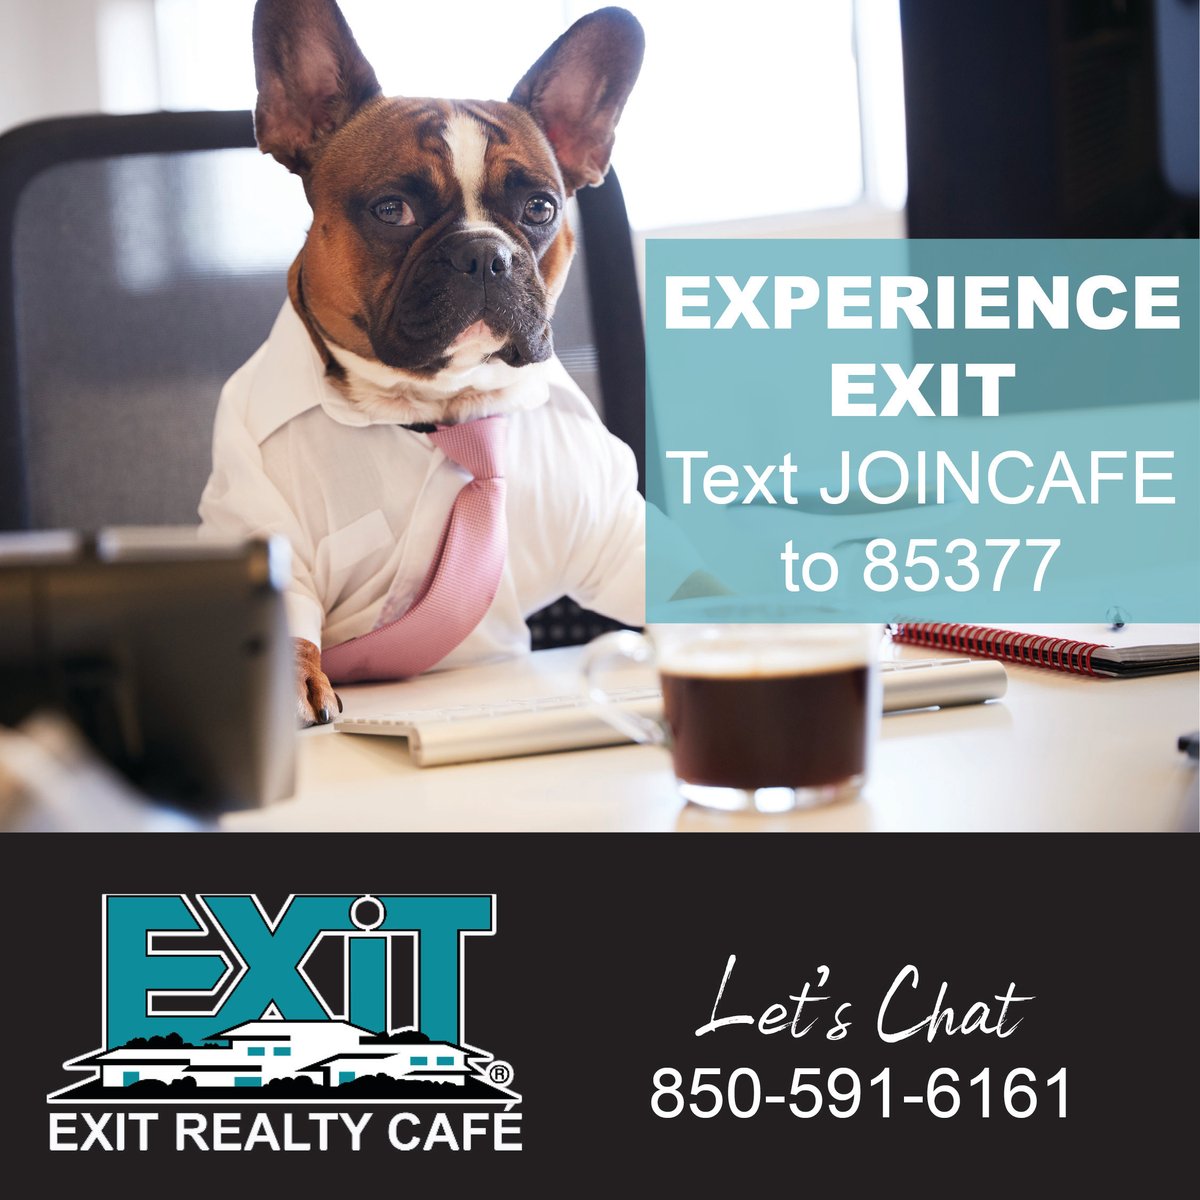 Experience the EXIT difference - text JOINCAFE to 85377 to get started!

#EXITCAFE #JOINEXIT #realty #RealEstate #EXITRealty #excellence #change #growth #support #success #bestinclass #advertising #marketing #differentiator #passiveincome #financialfreedom #realestatecareers